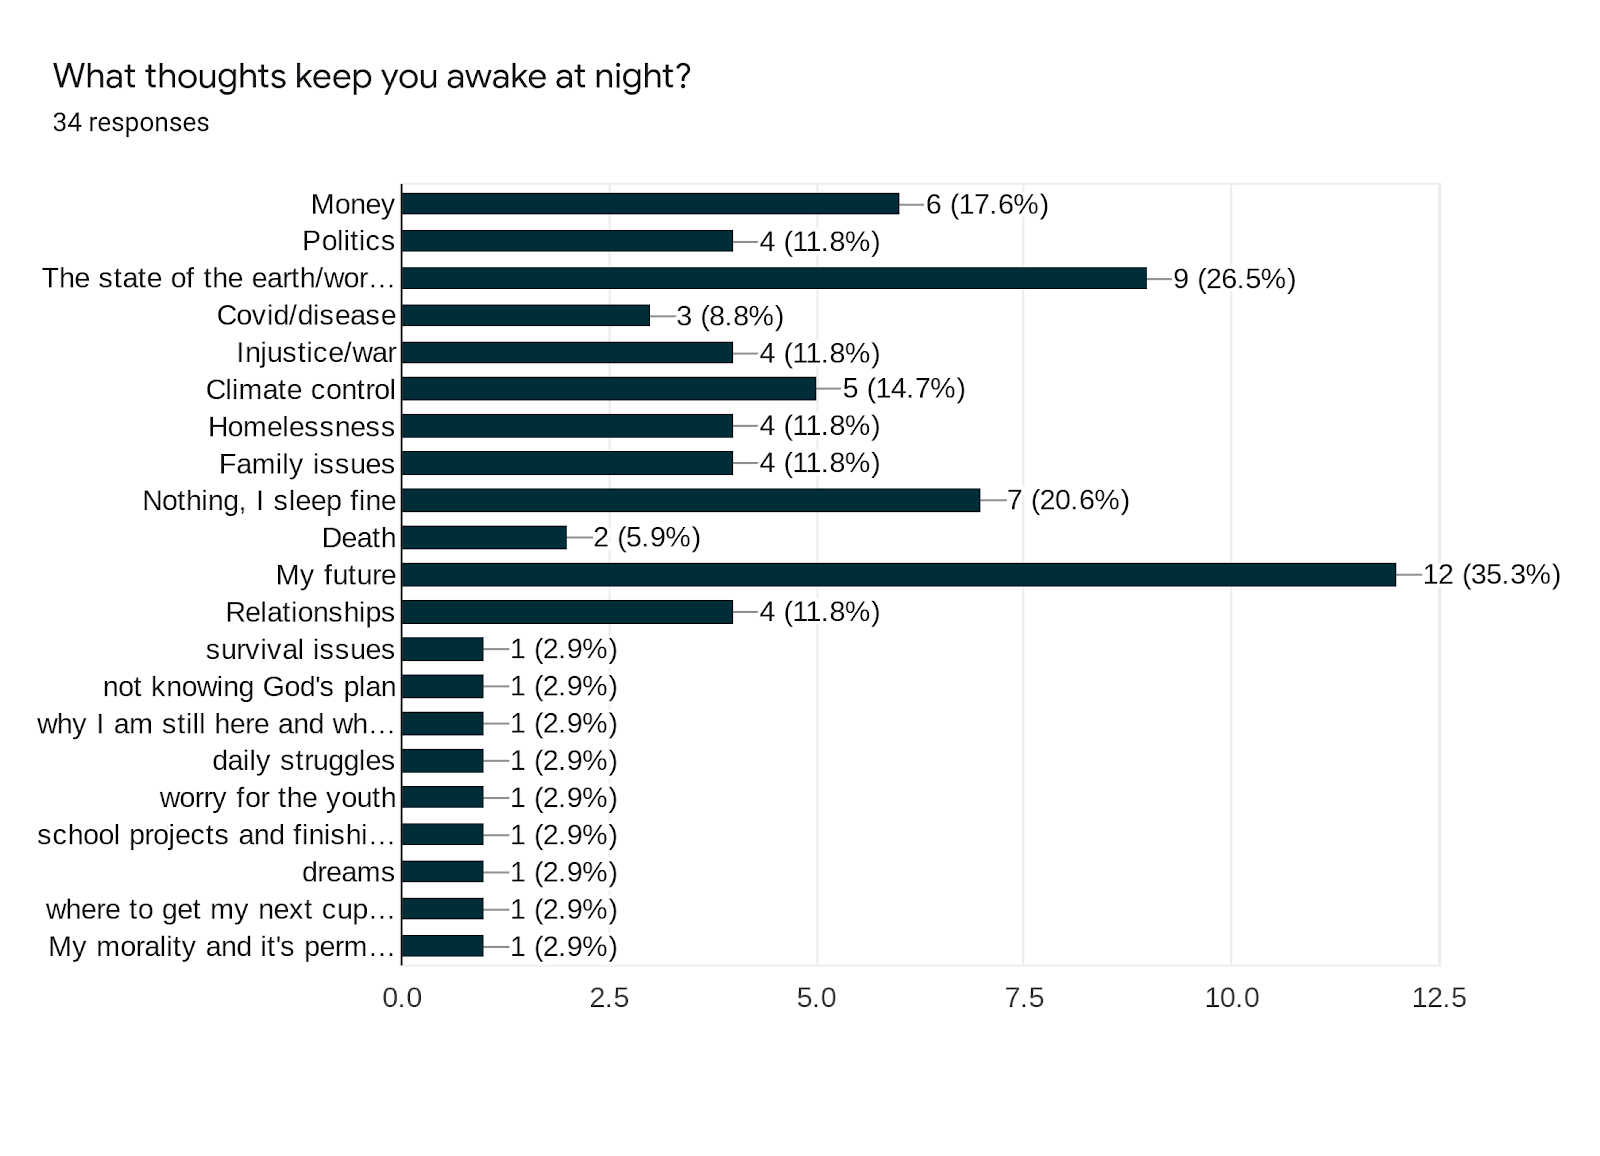 Forms response chart. Question title: What thoughts keep you awake at night?. Number of responses: 34 responses.